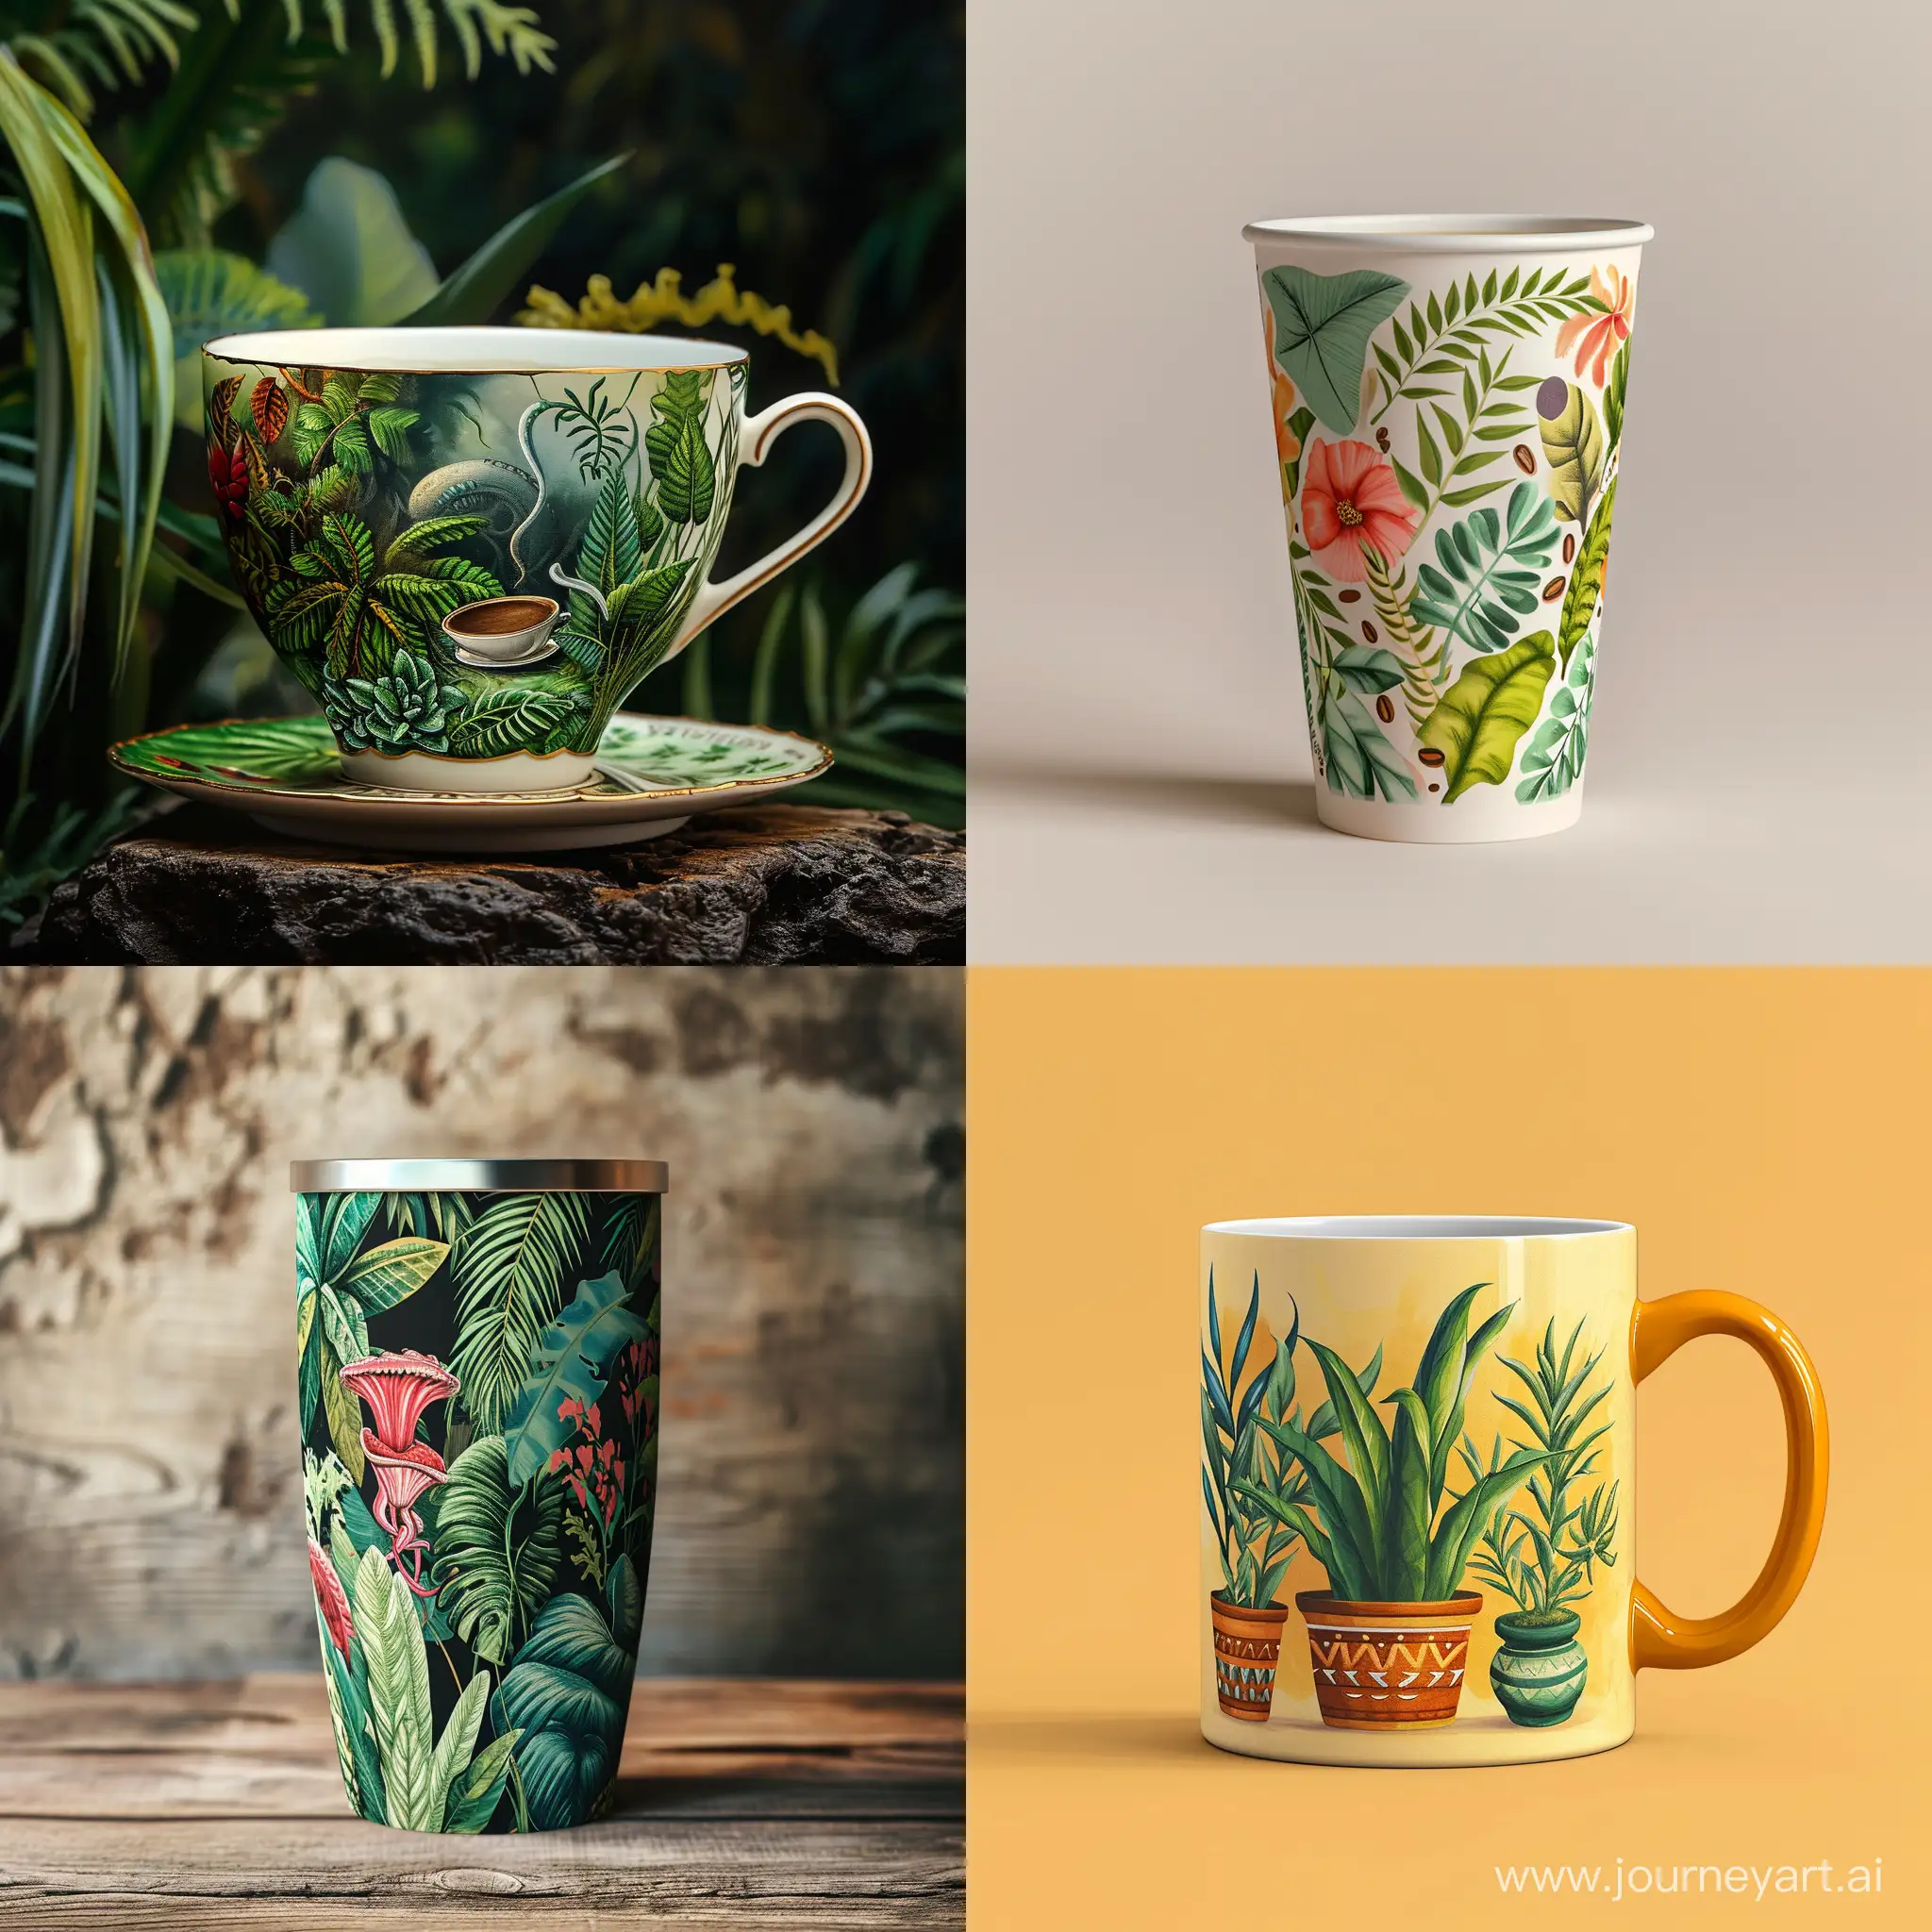 Realistic-Coffee-Cup-Illustration-with-Plants-and-Aliens